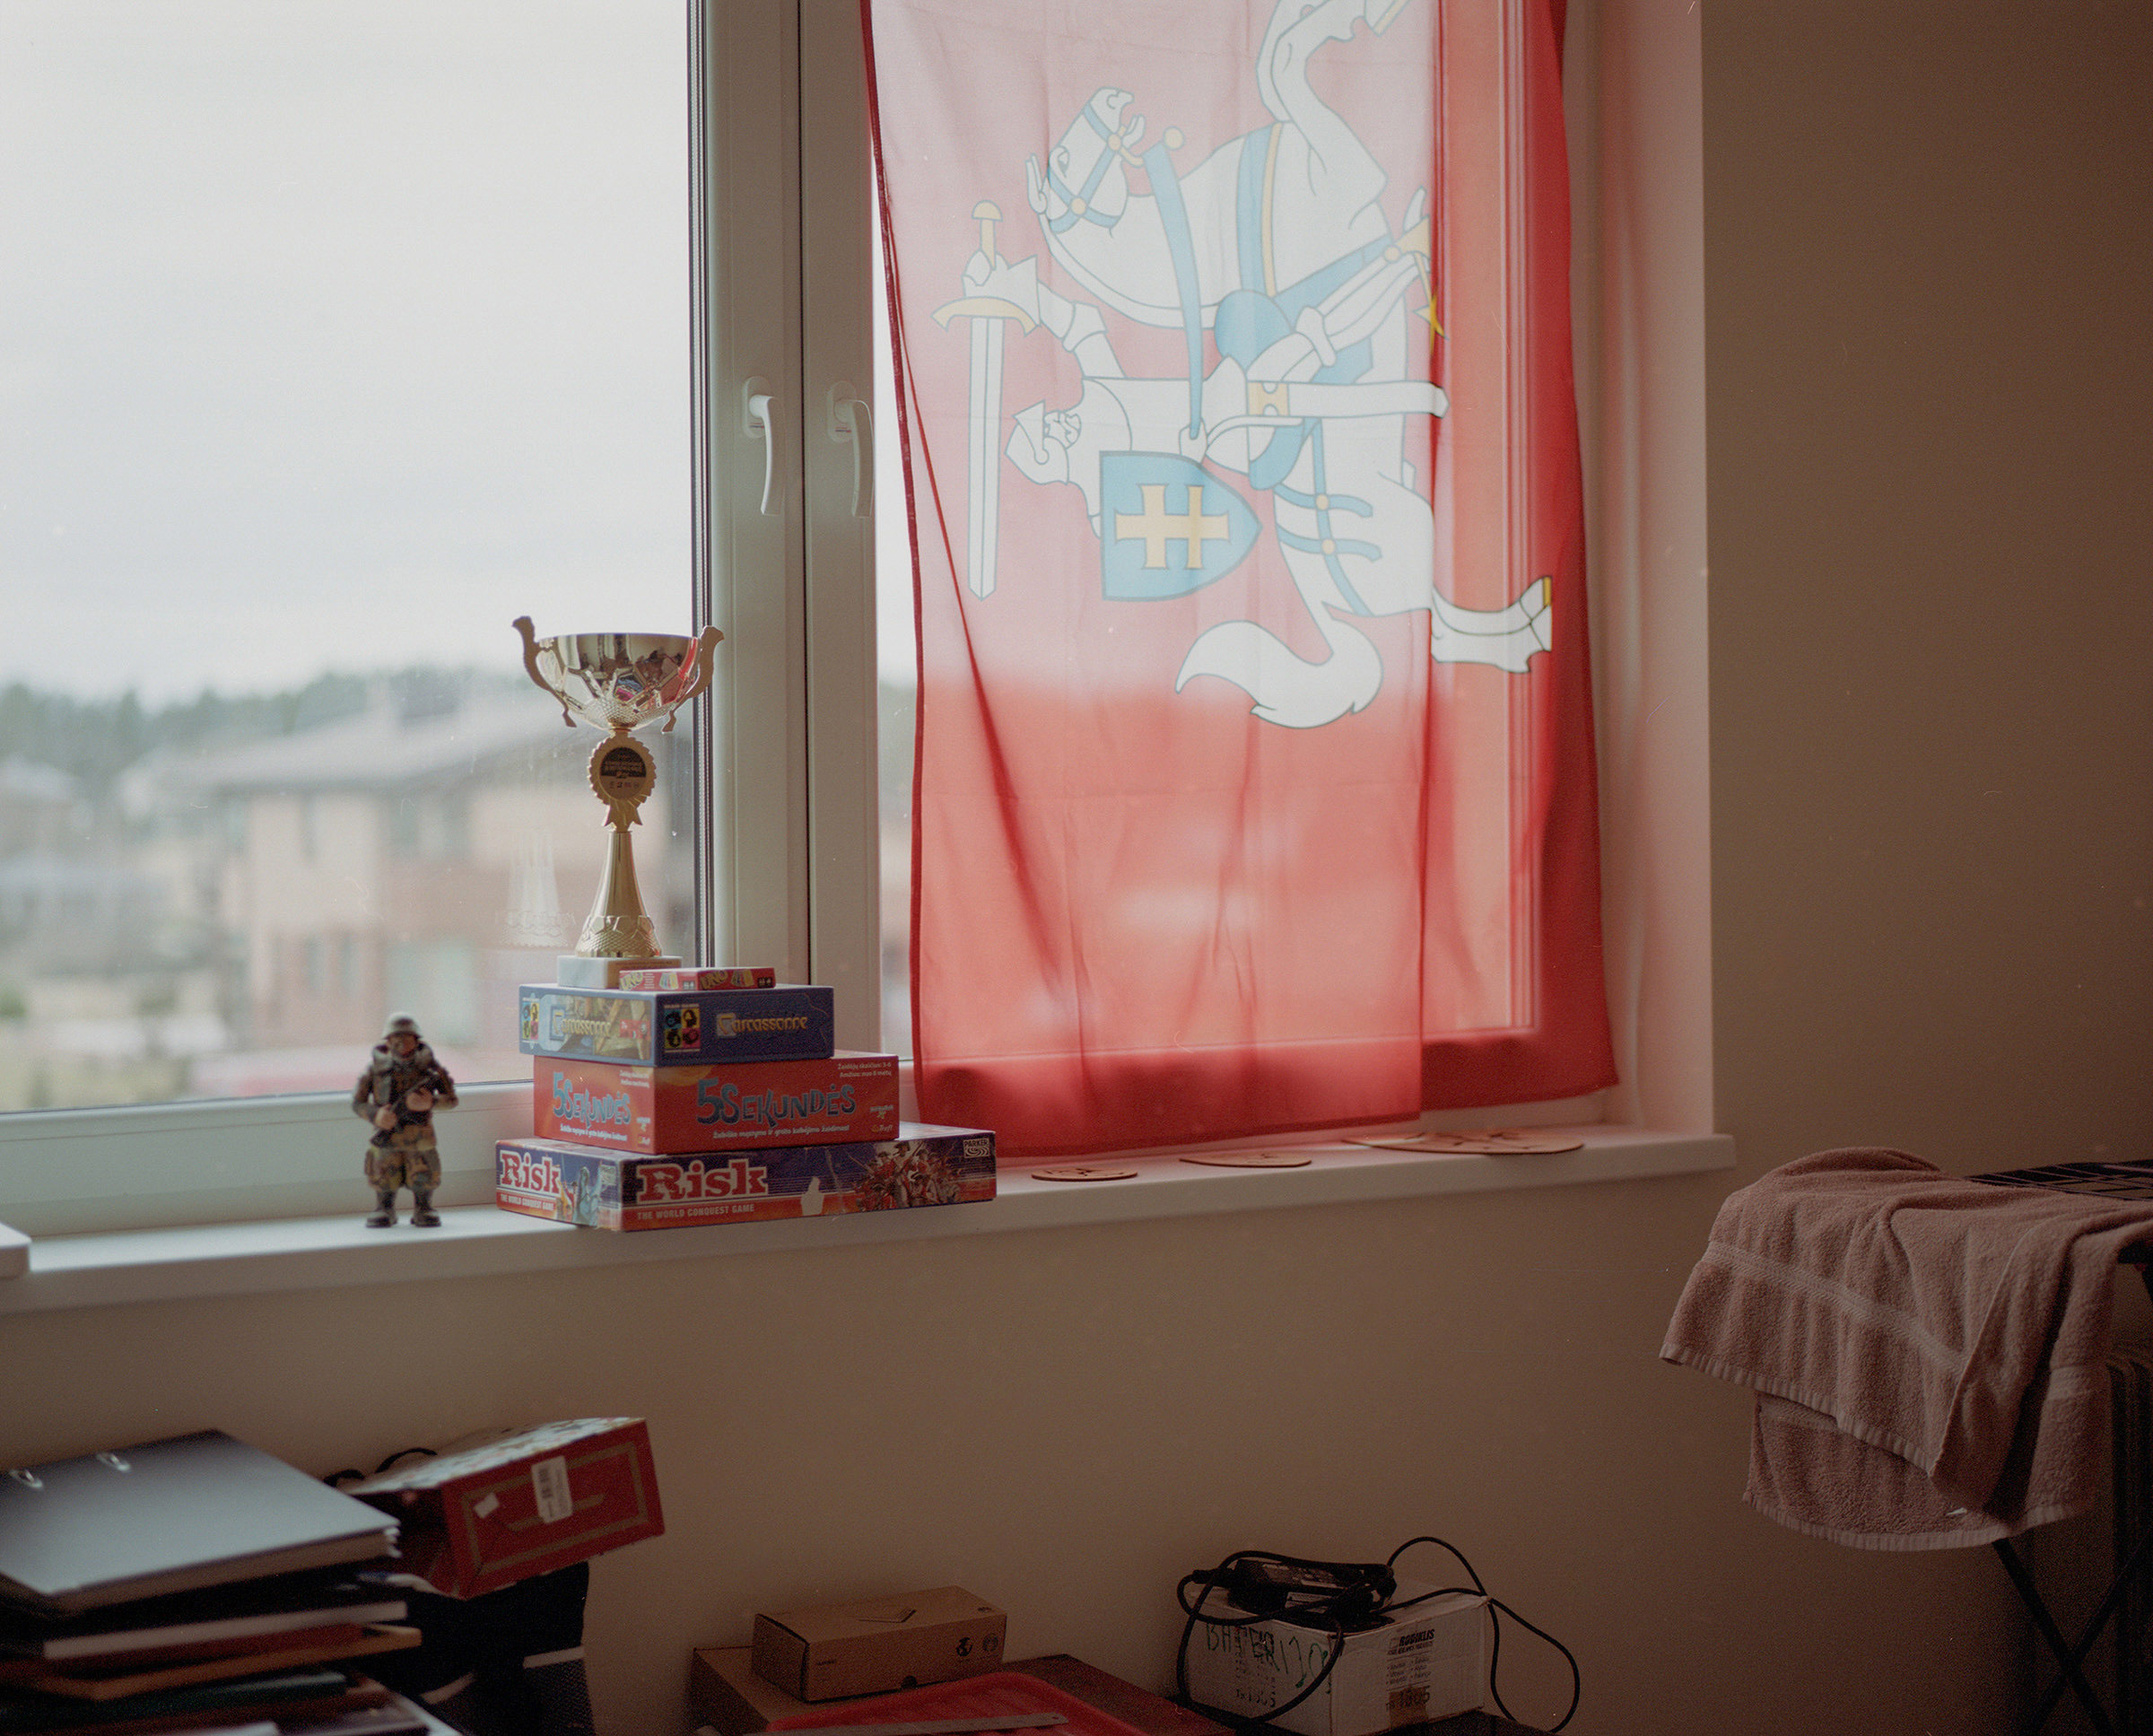 Gintautas' training centre window is decorated with Historic Lithuanian National flag next to which stands toy soldier figurine and his personal wining cup. Kaunas, Lithuania.